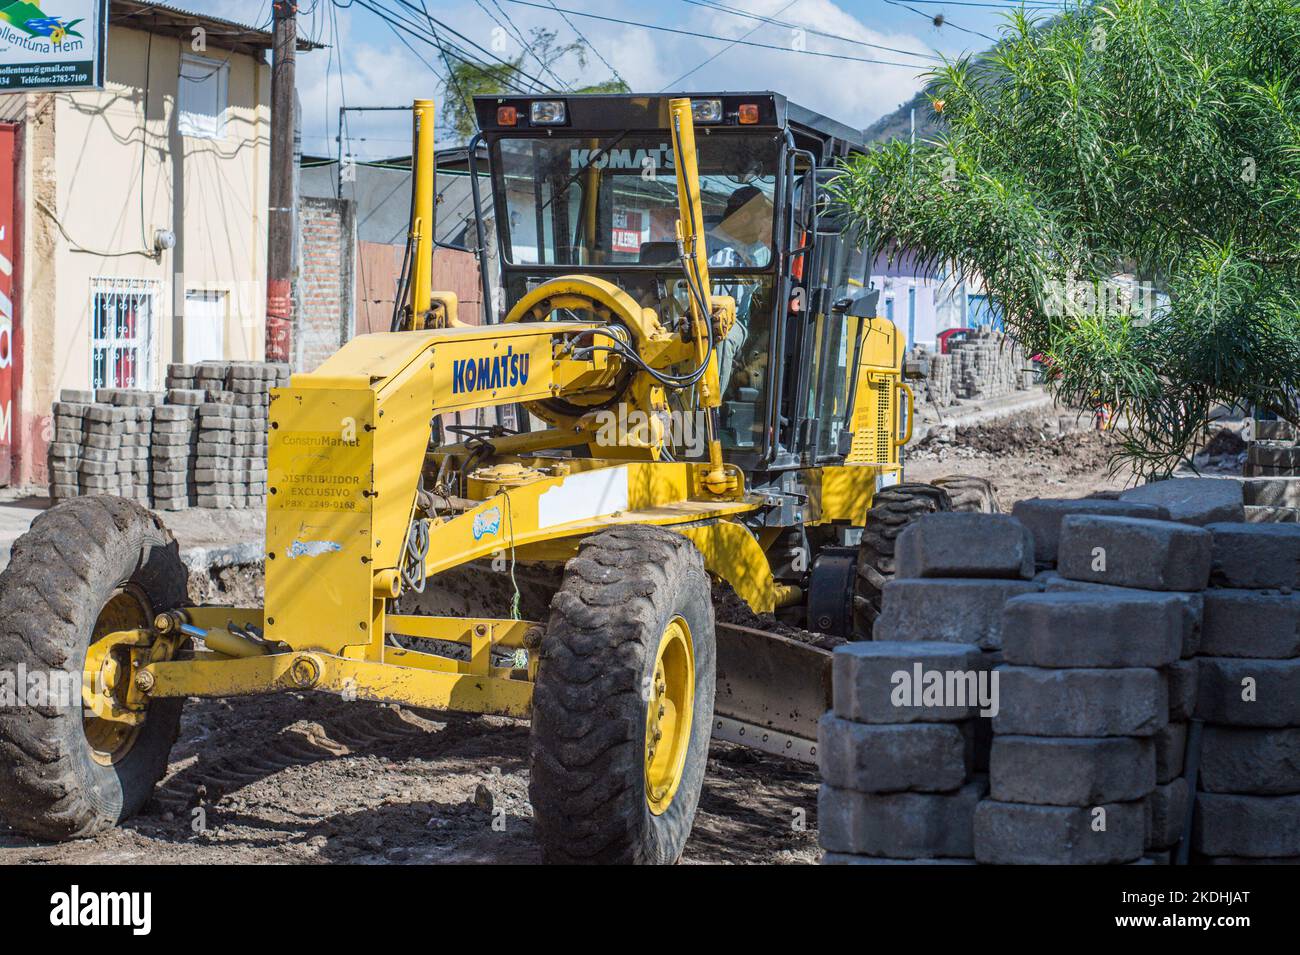 Motor grader working on finishing work on sewer system pipes below a street paved in concrete cast blocks. Stock Photo